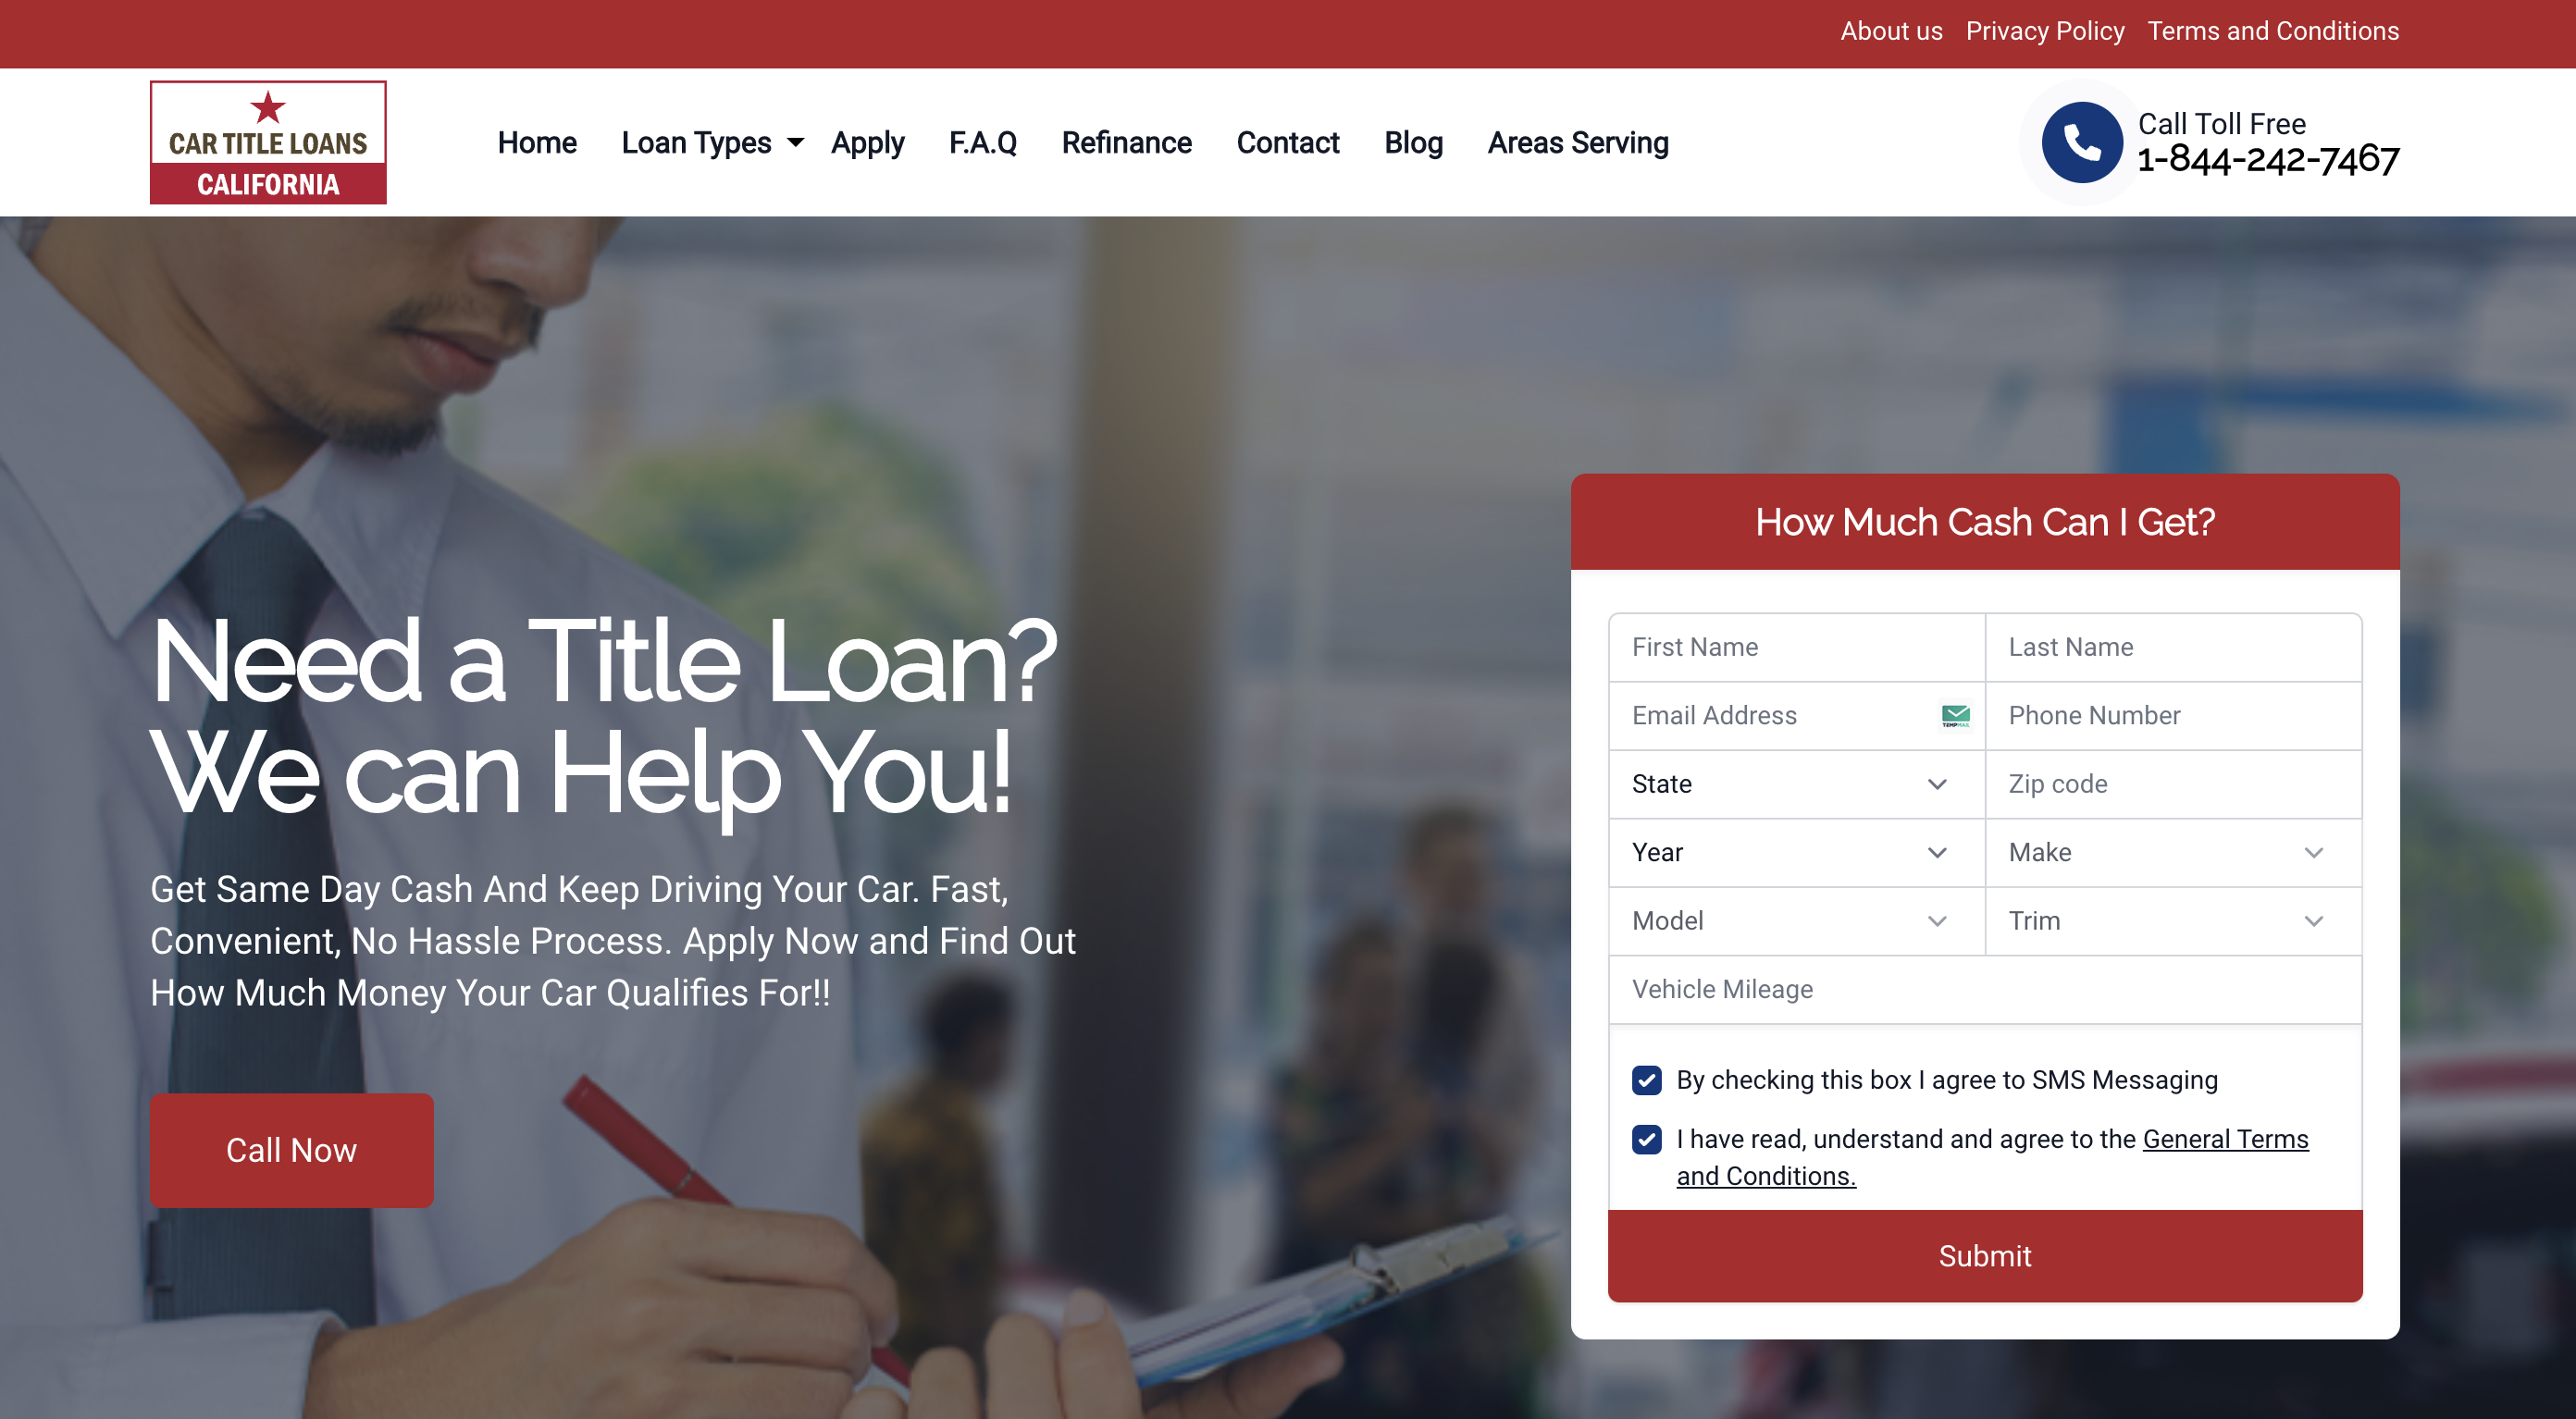 Car Title Loans California Expands to Florida, Offering Lowest Interest Rates and Maximum Cash for Car Title Loans